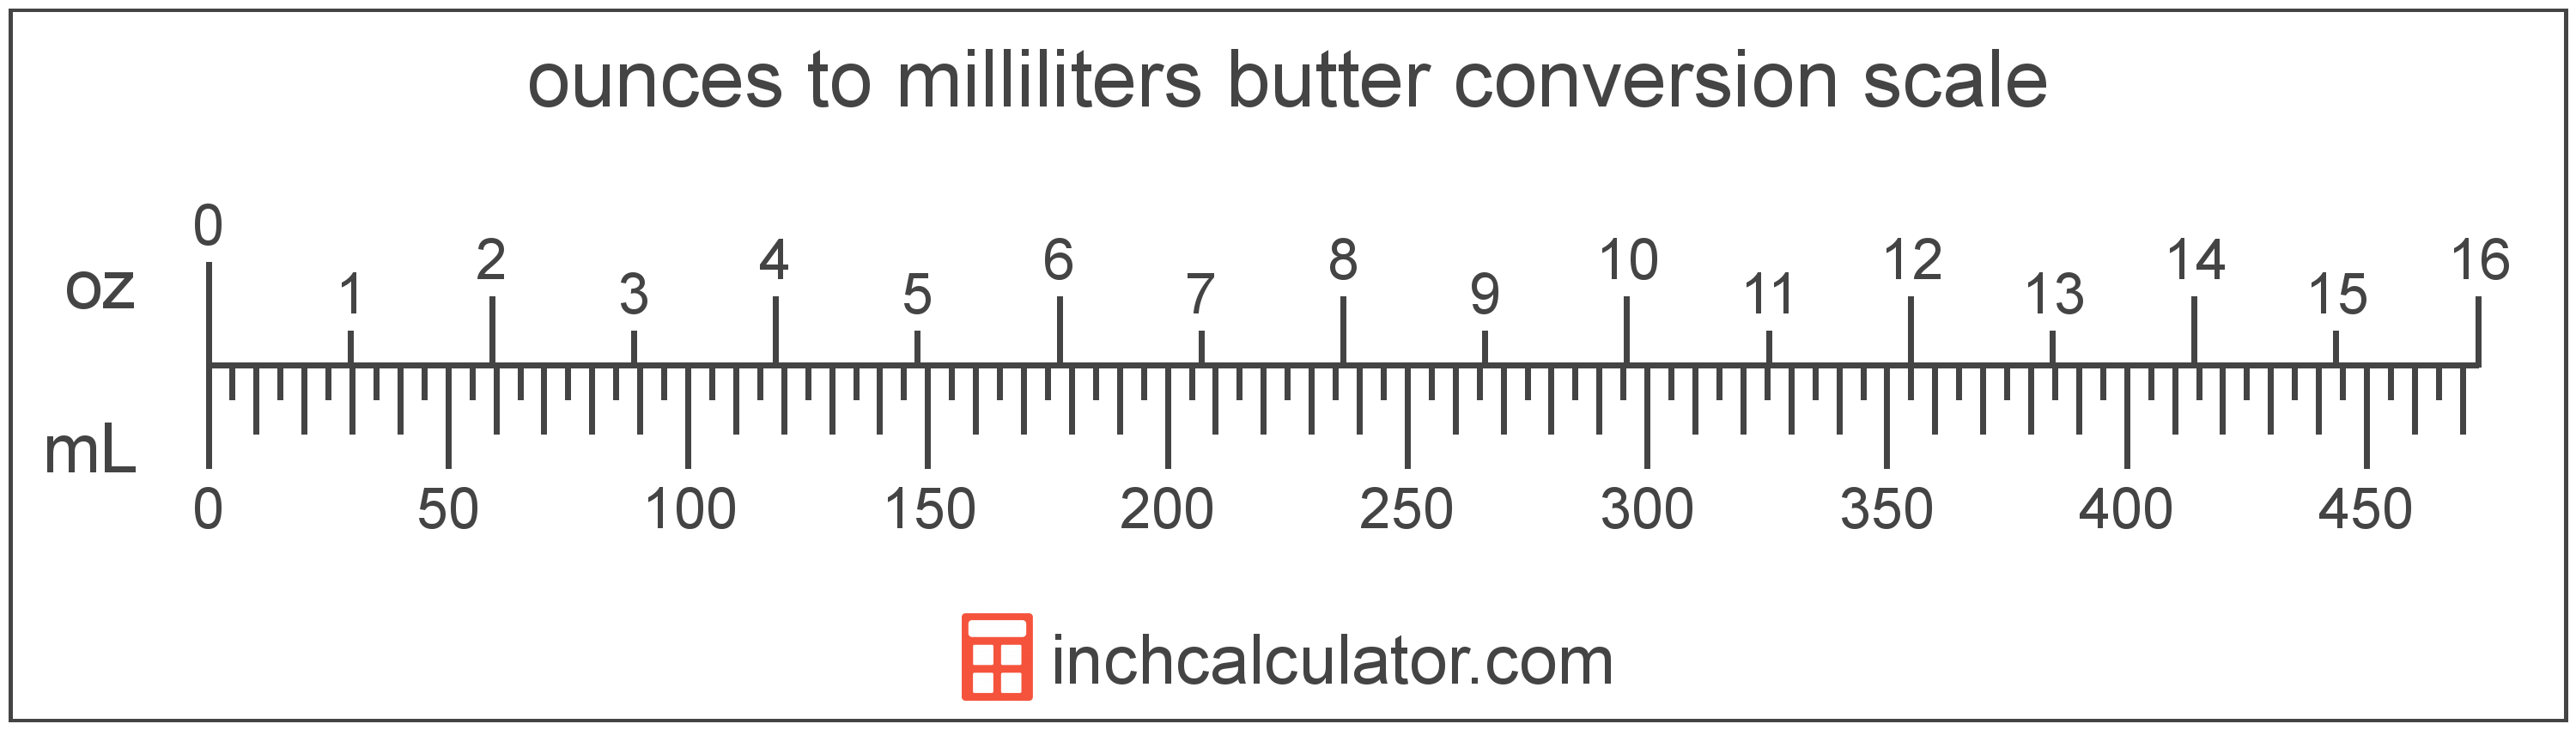 conversion scale showing milliliters and equivalent ounces butter values